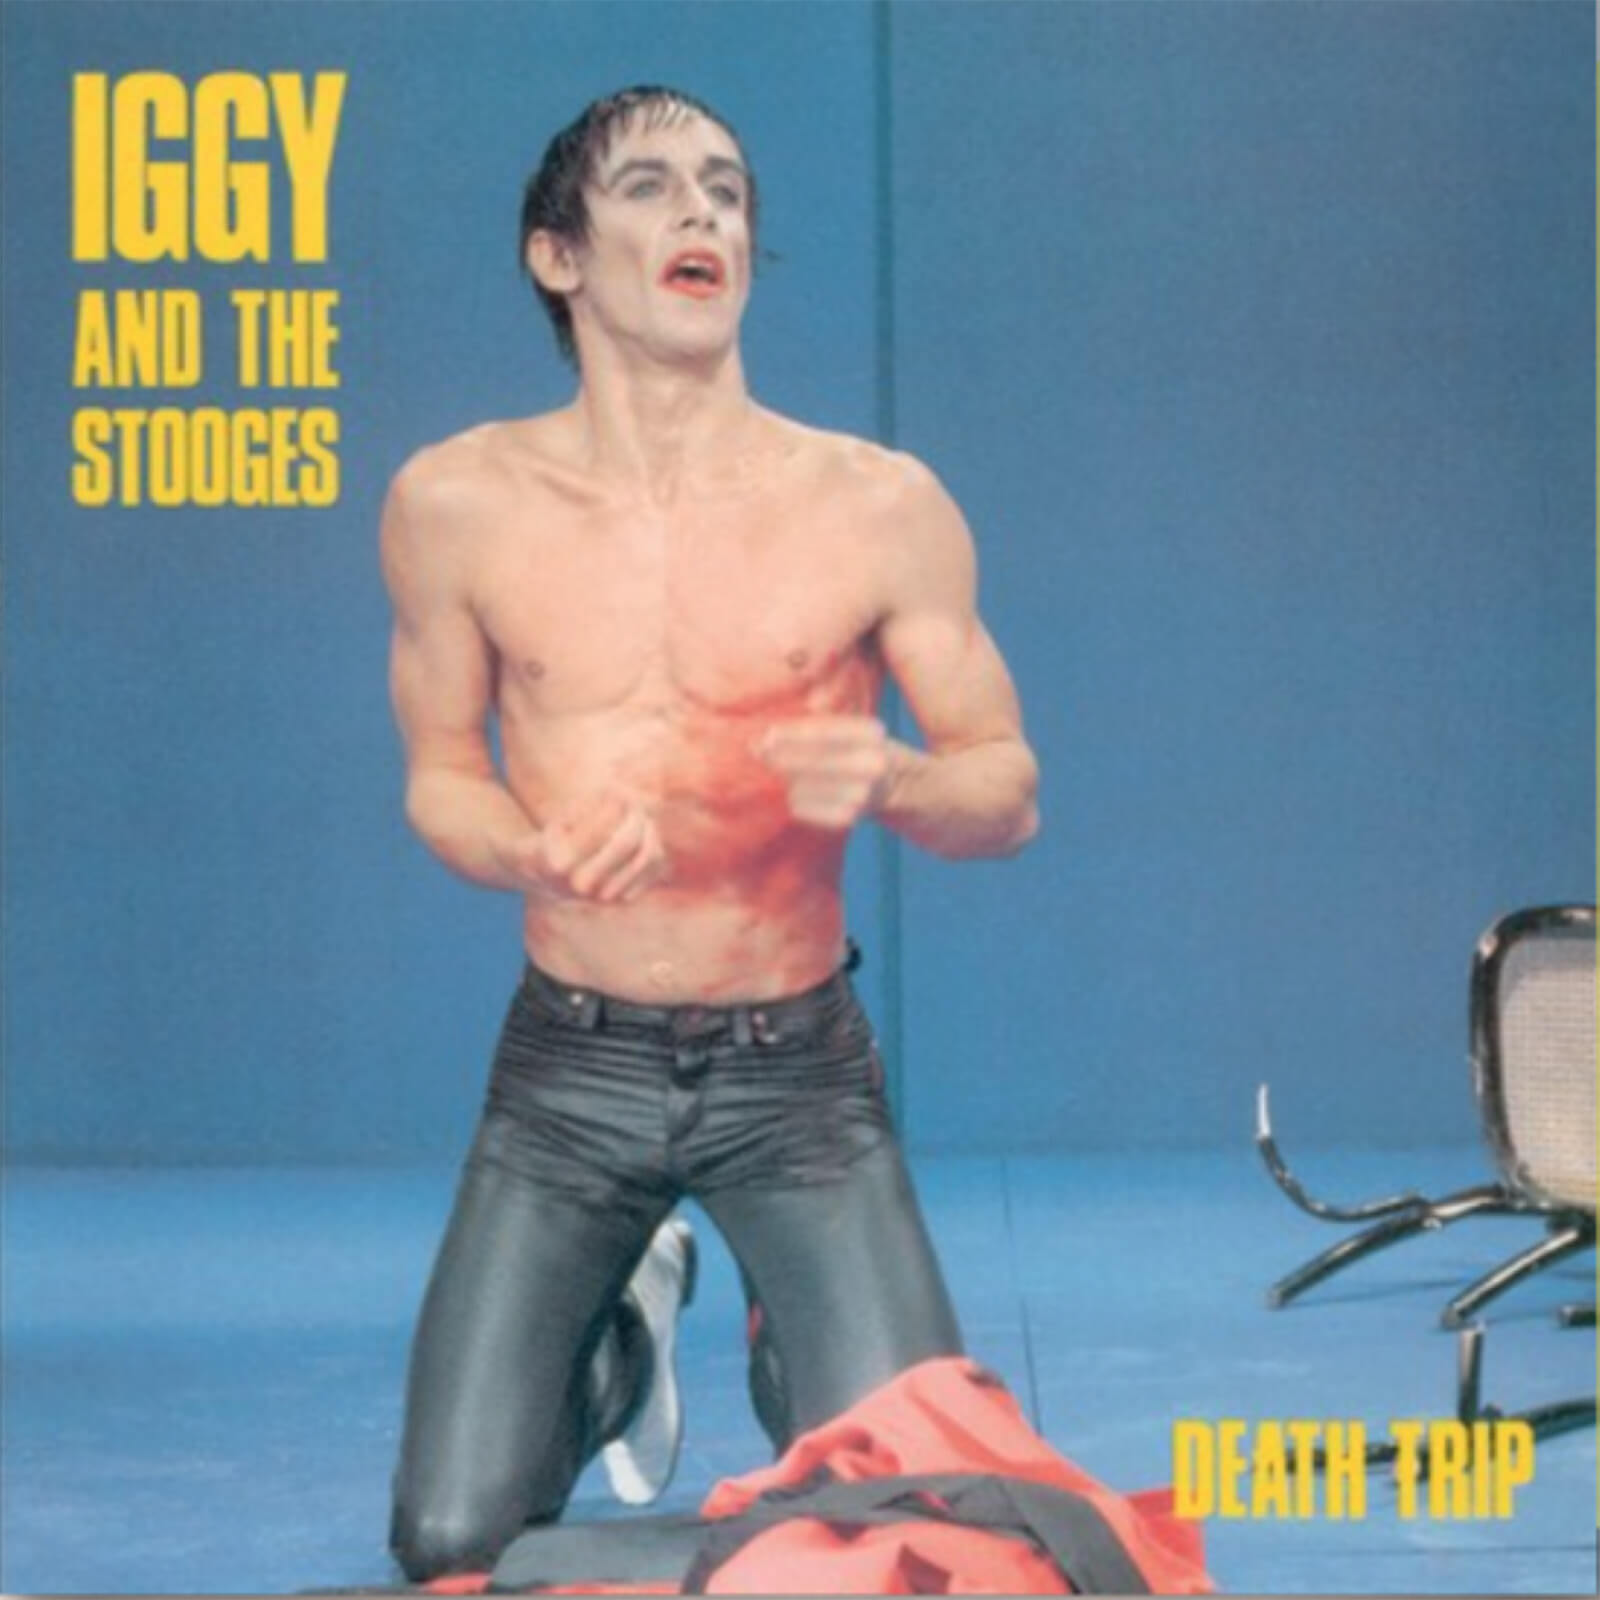 Iggy And The Stooges - Death Trip LP (Yellow)